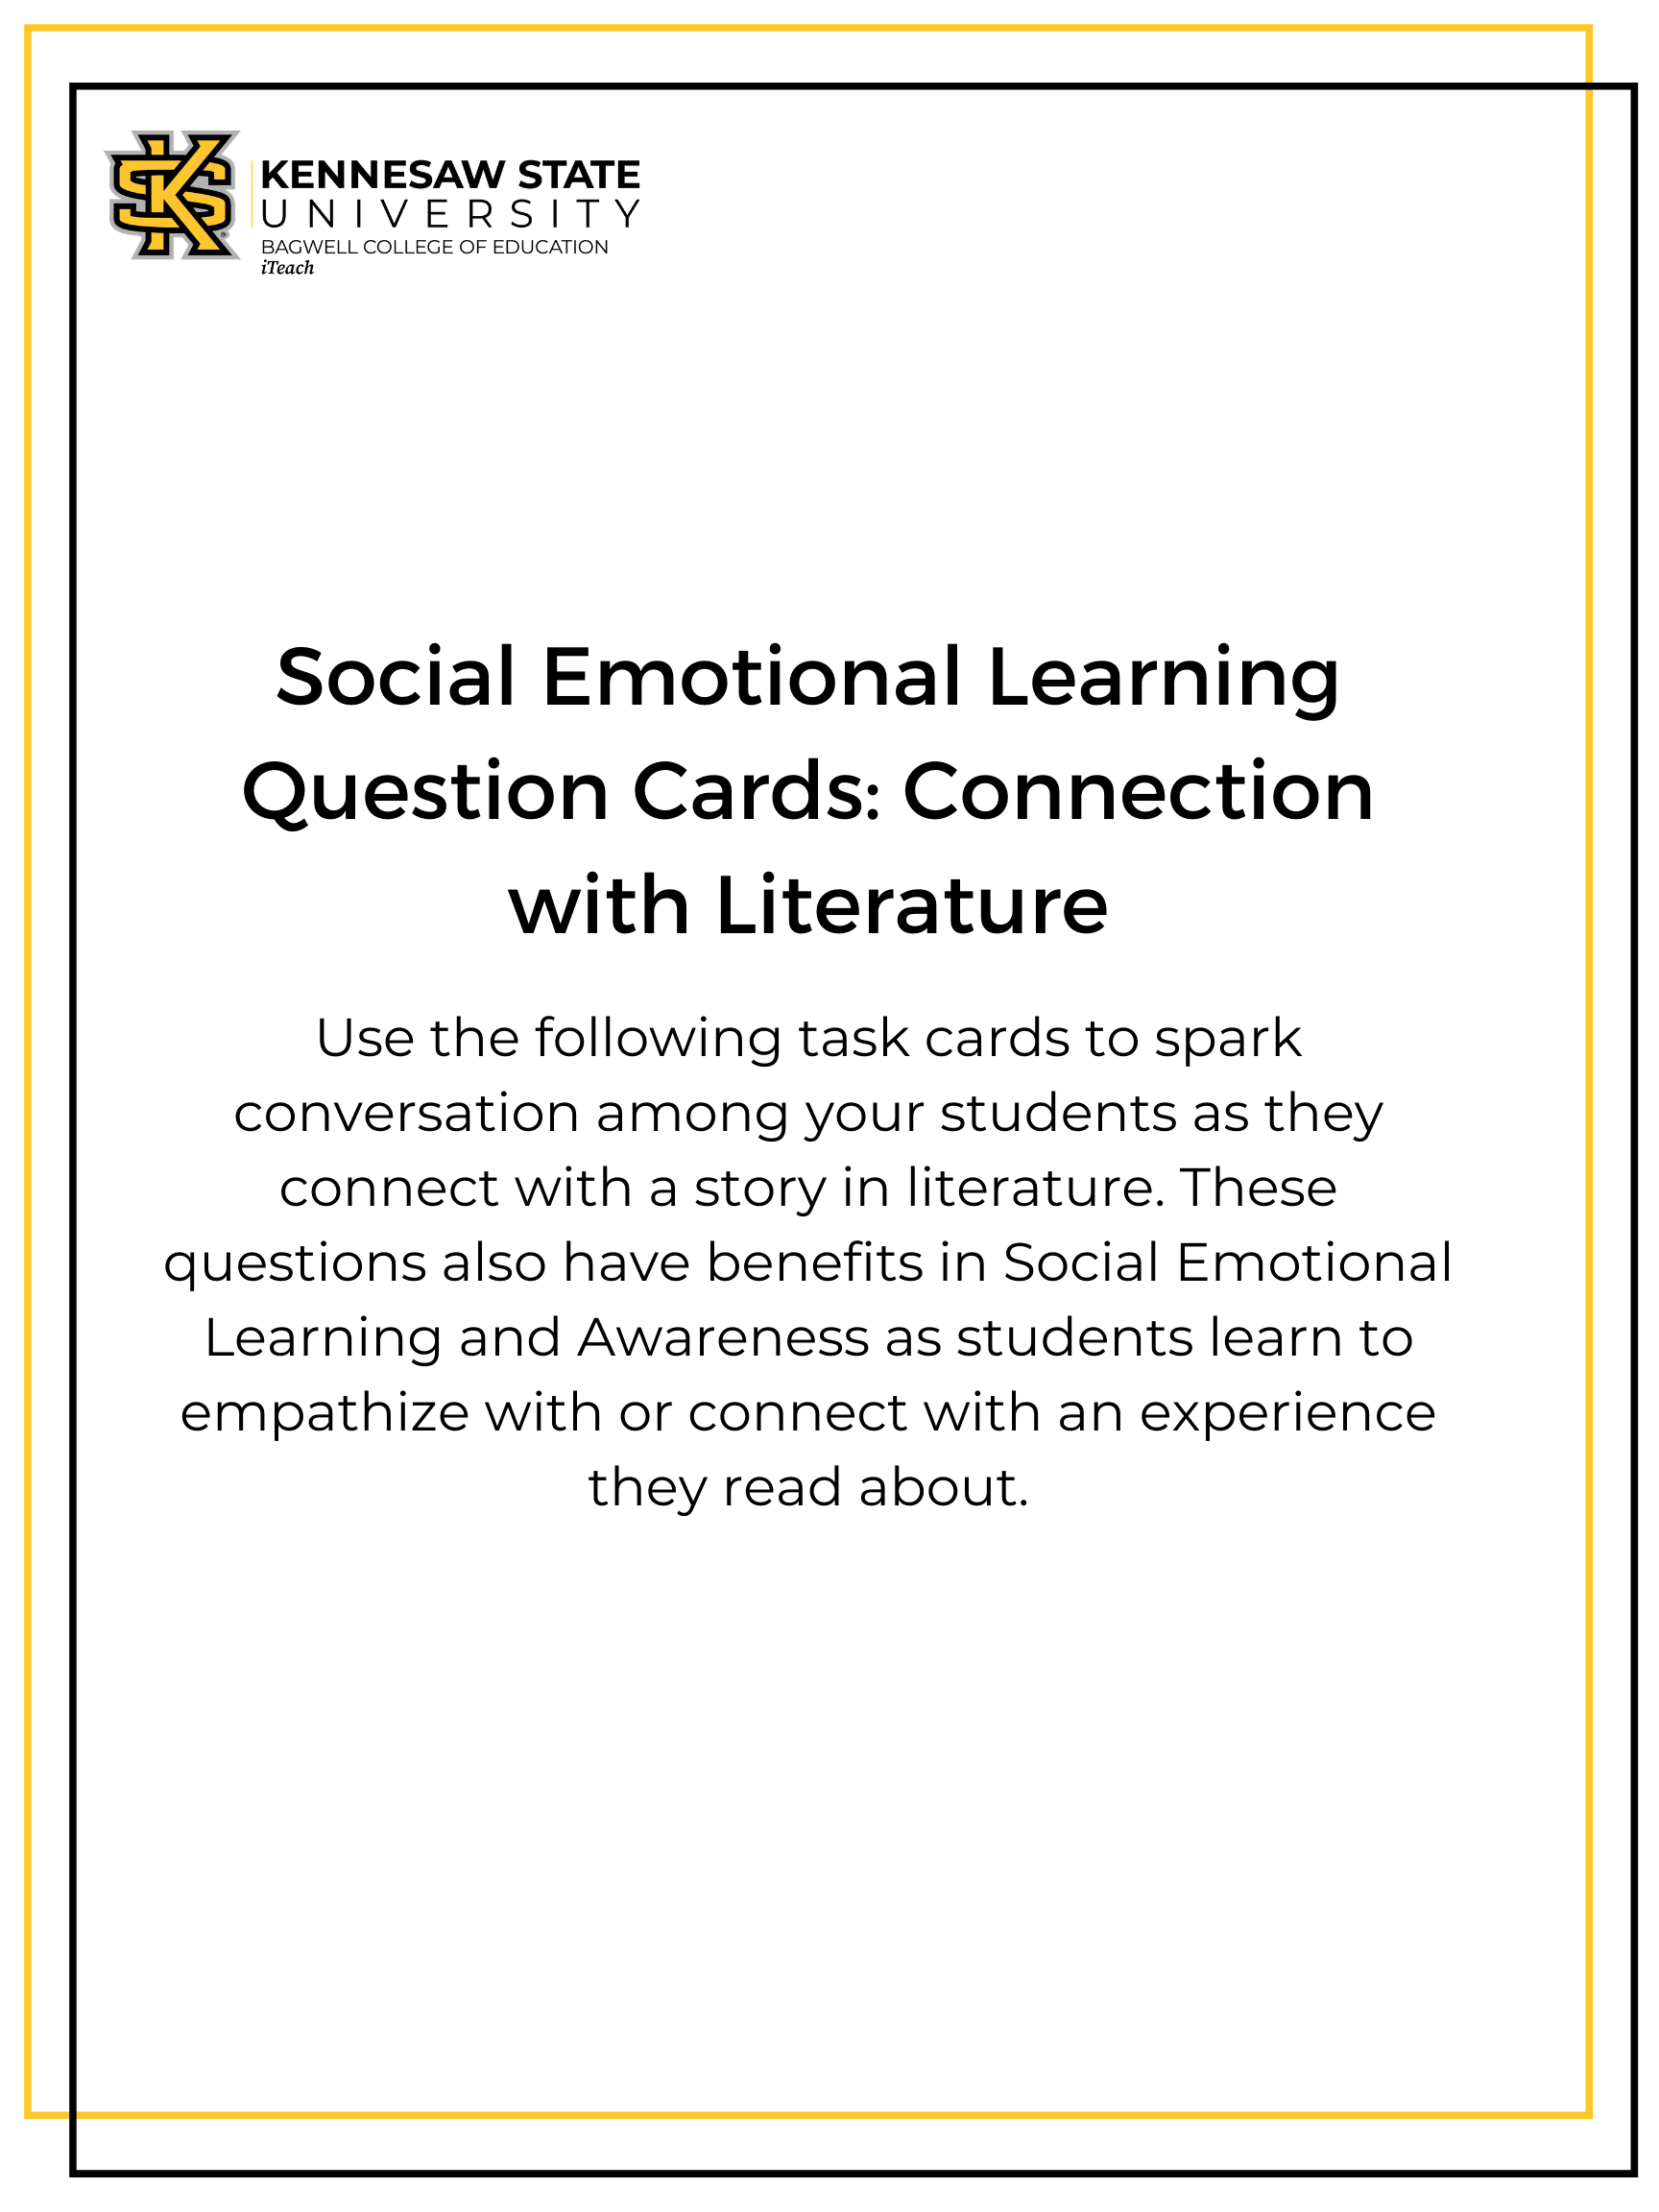 SEL Literature Question Cards Header.png